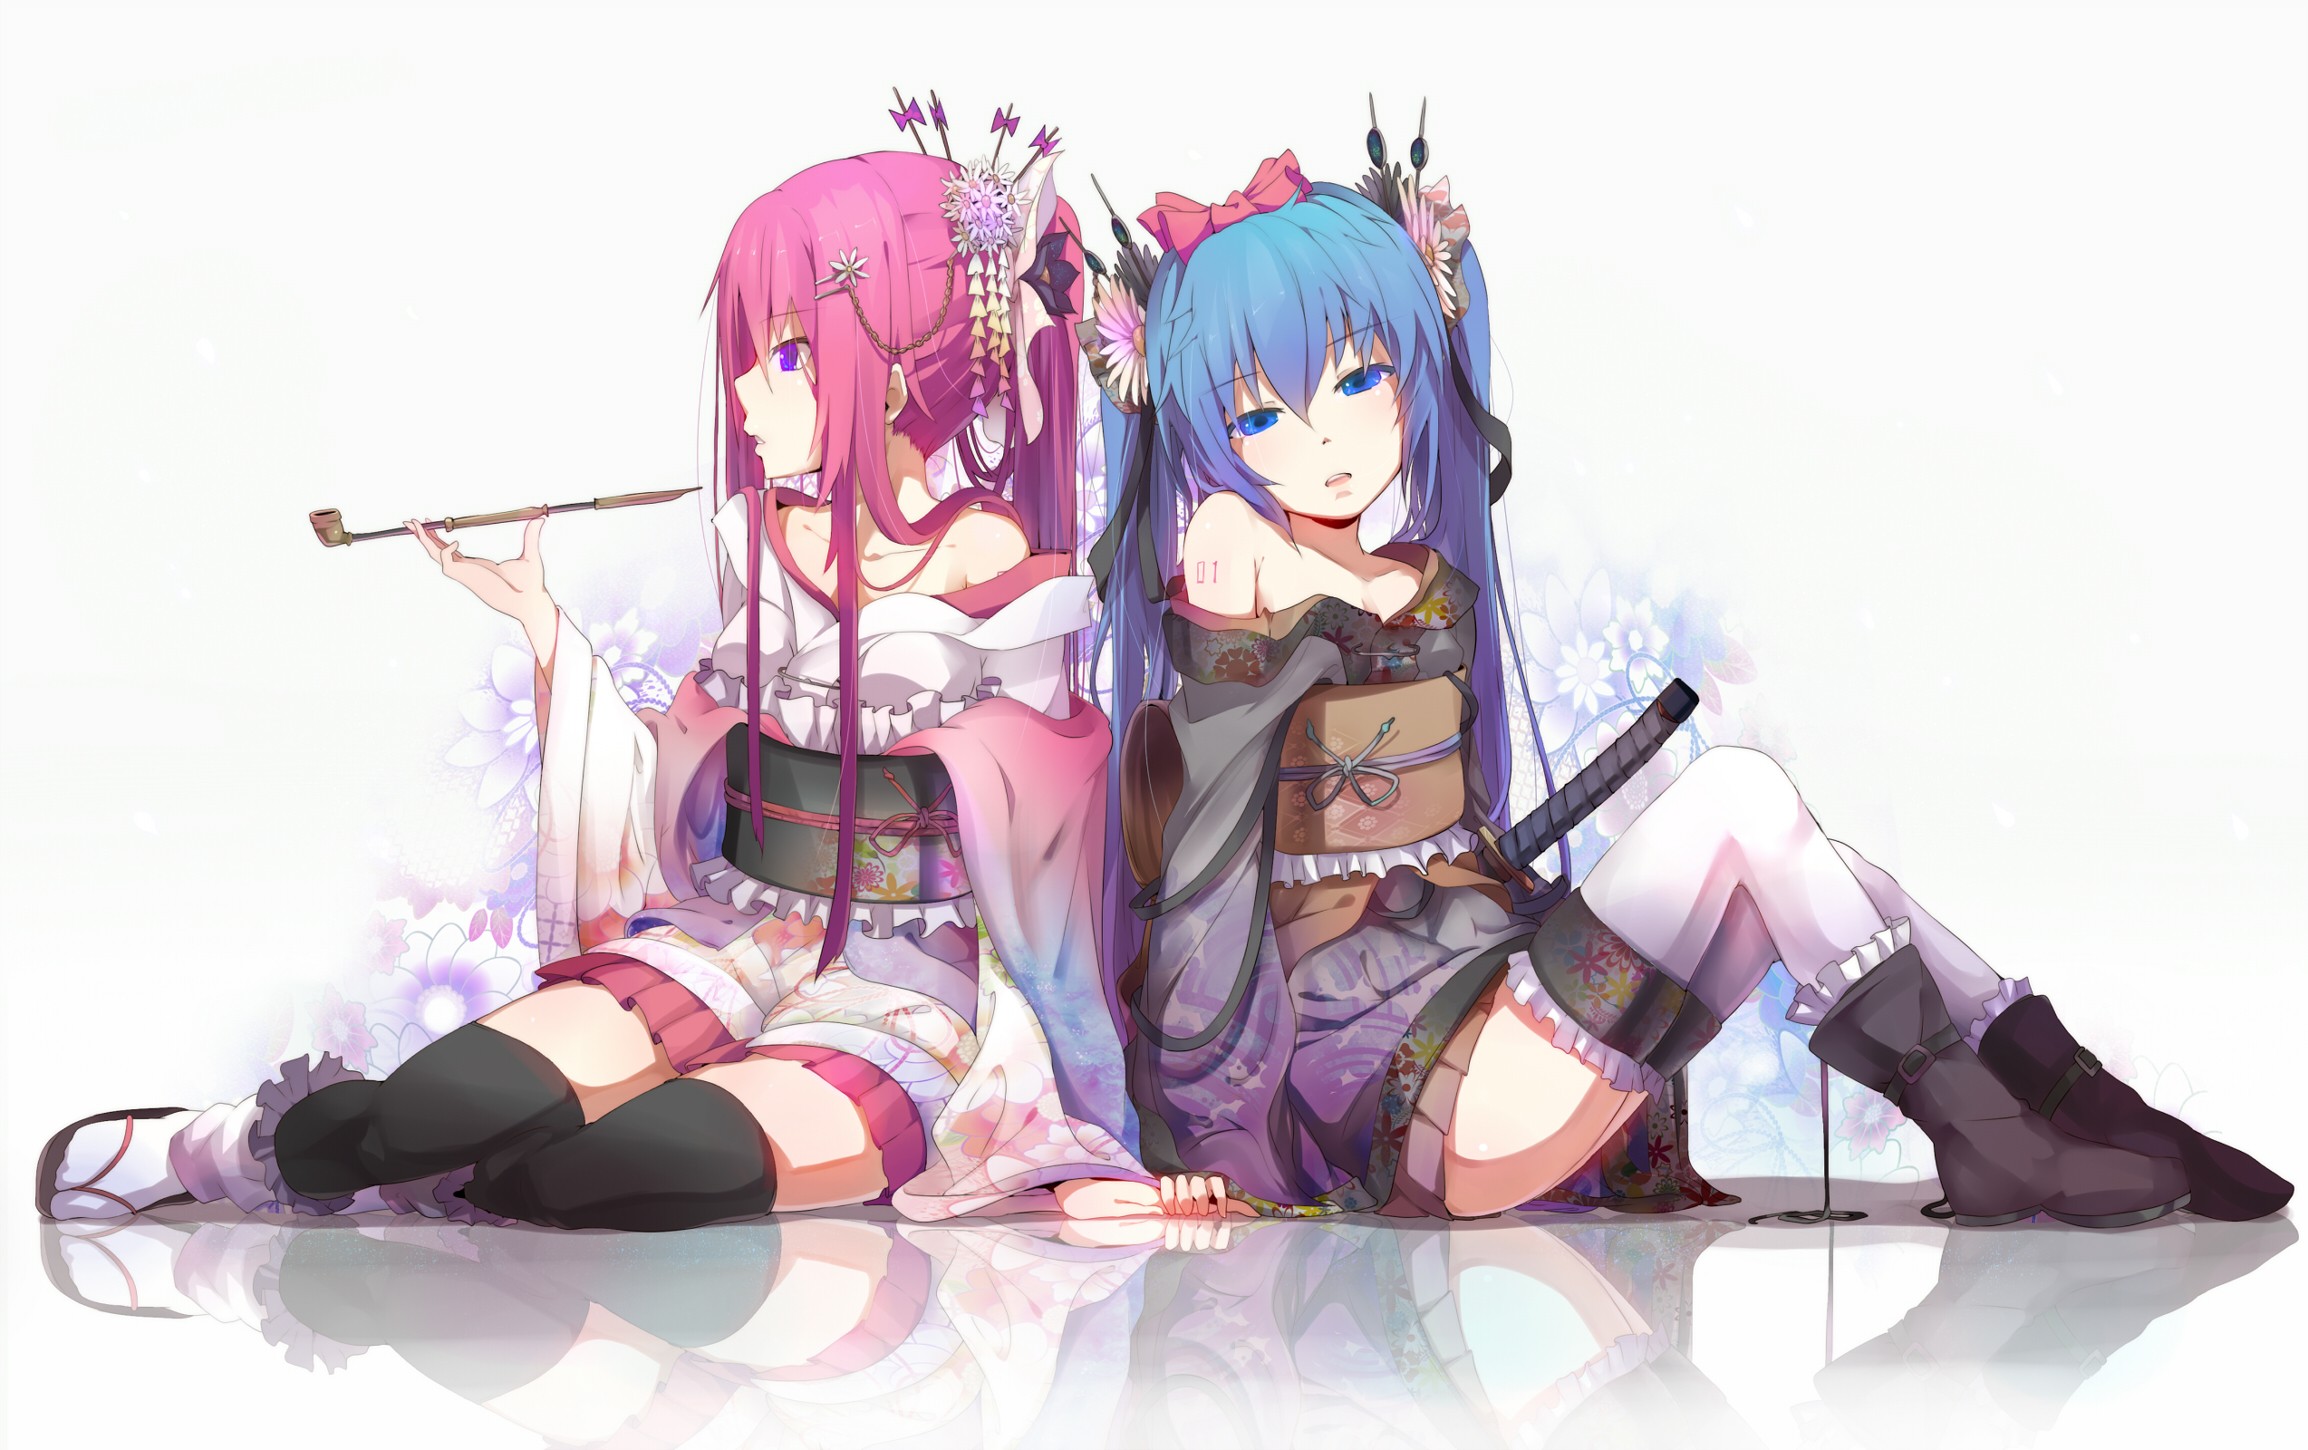 vocaloid, Flowers, Hatsune, Miku, Blue, Eyes, Megurine, Luka, Japanese, Long, Hair, Kimono, Blue, Hair, Pink, Hair, Thigh, Highs, Twintails, Pipes, Ponytails, Purple, Eyes, Japanese, Clothes Wallpaper